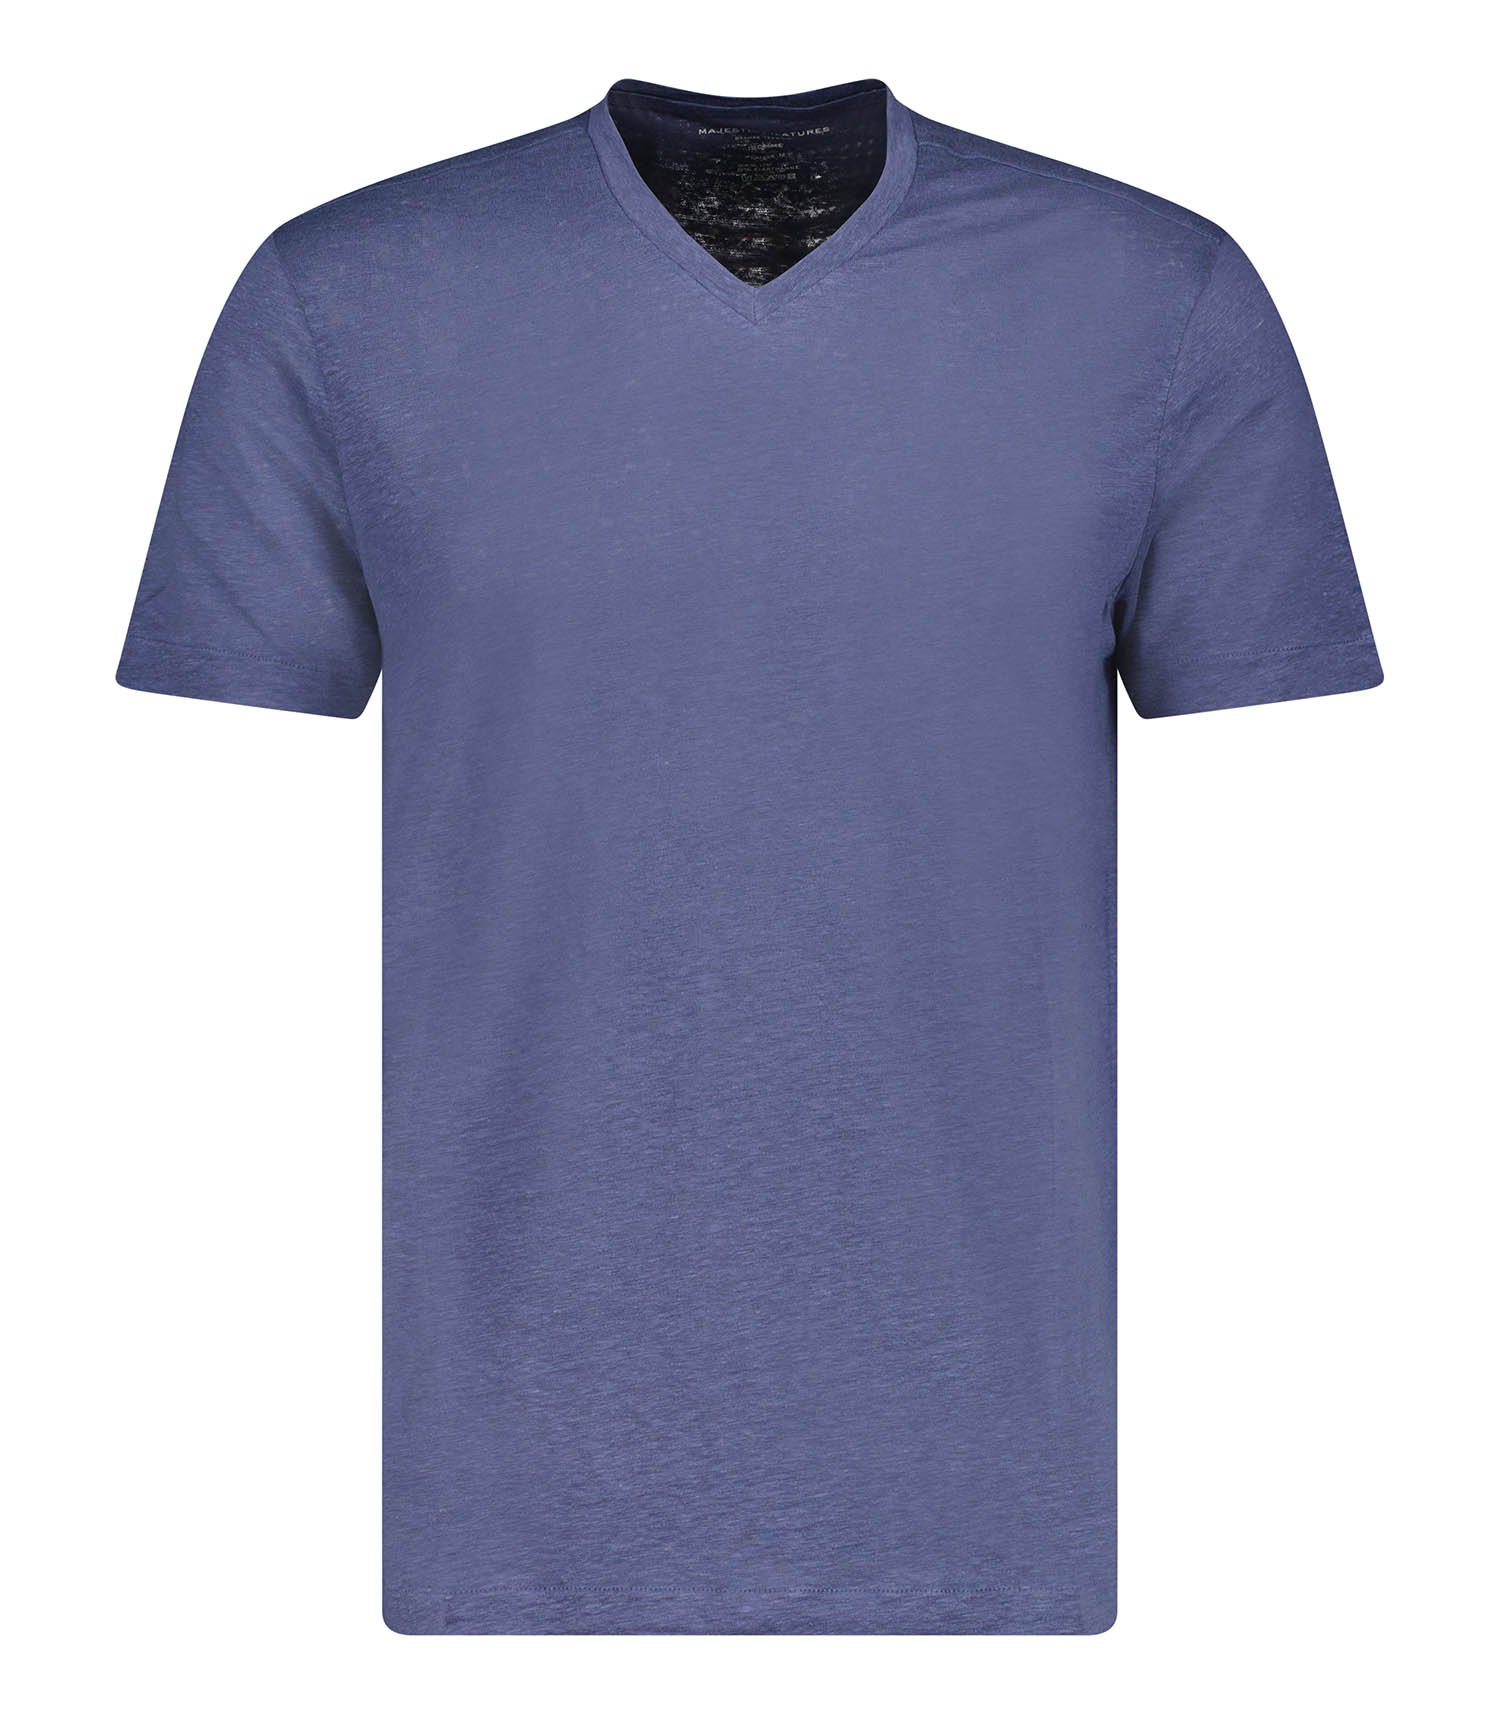 Tee-shirt Homme Col V Manches Courtes Lin Venice Blue Majestic